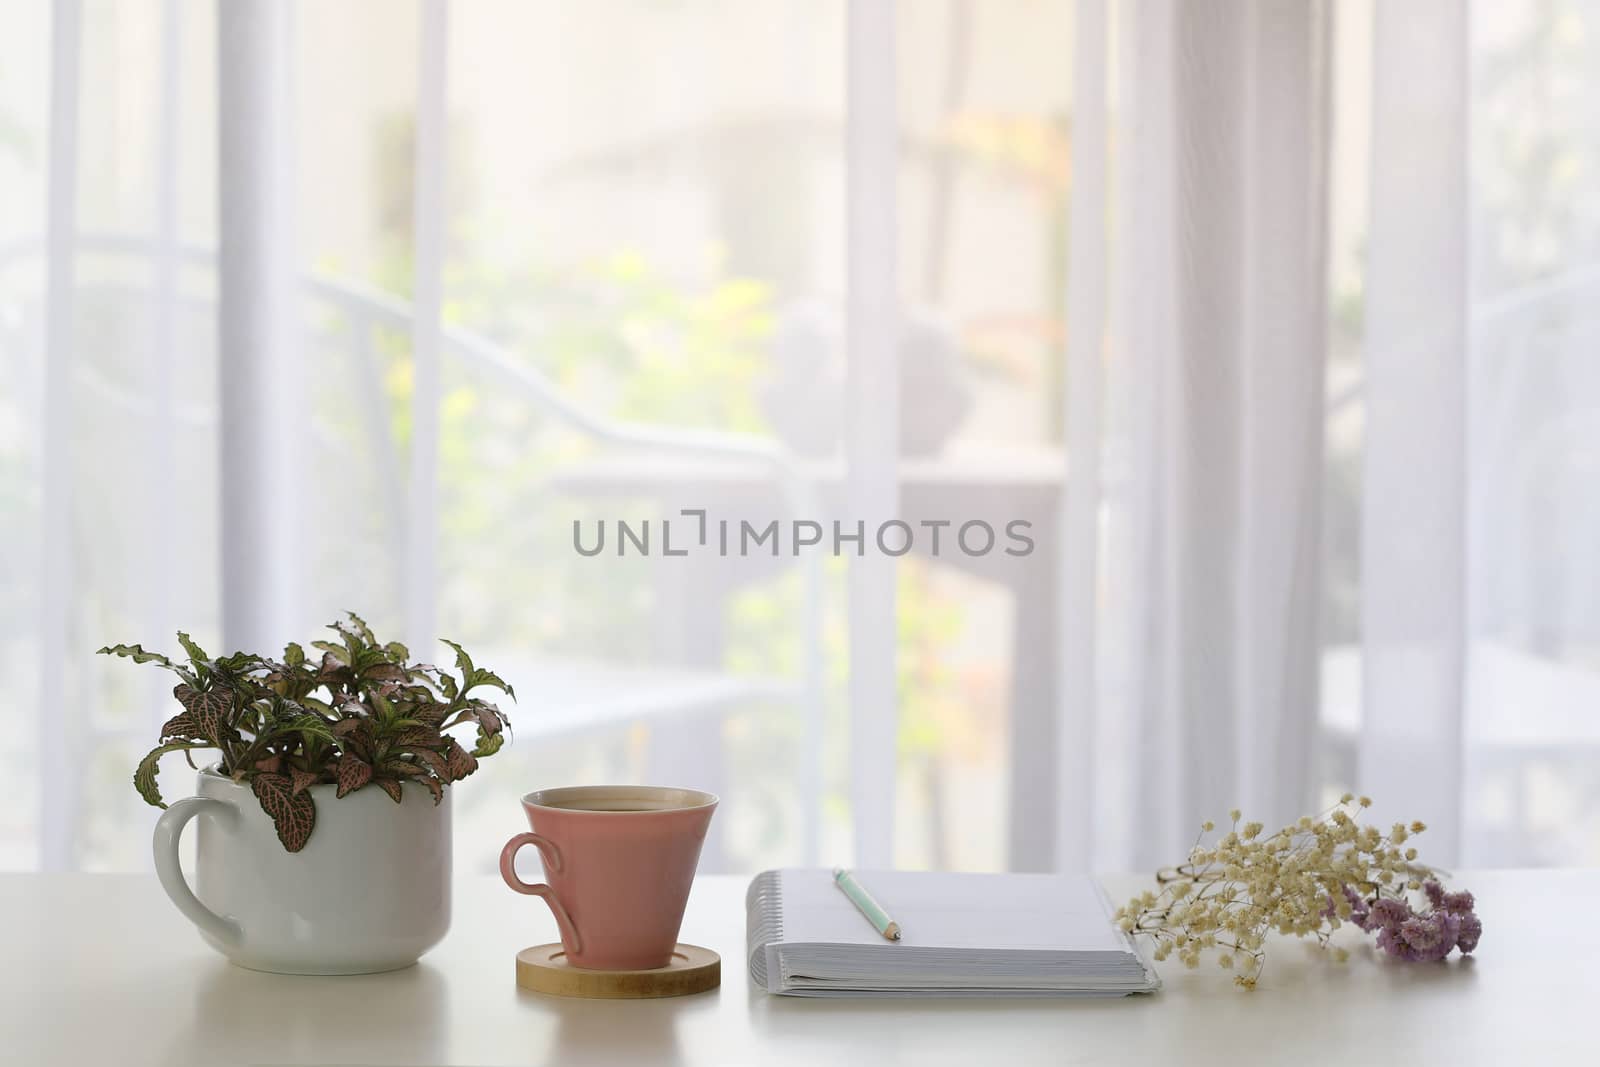 Interior house decor with pink coffee cup and white notebook and blue pencil and plants with see through curtain